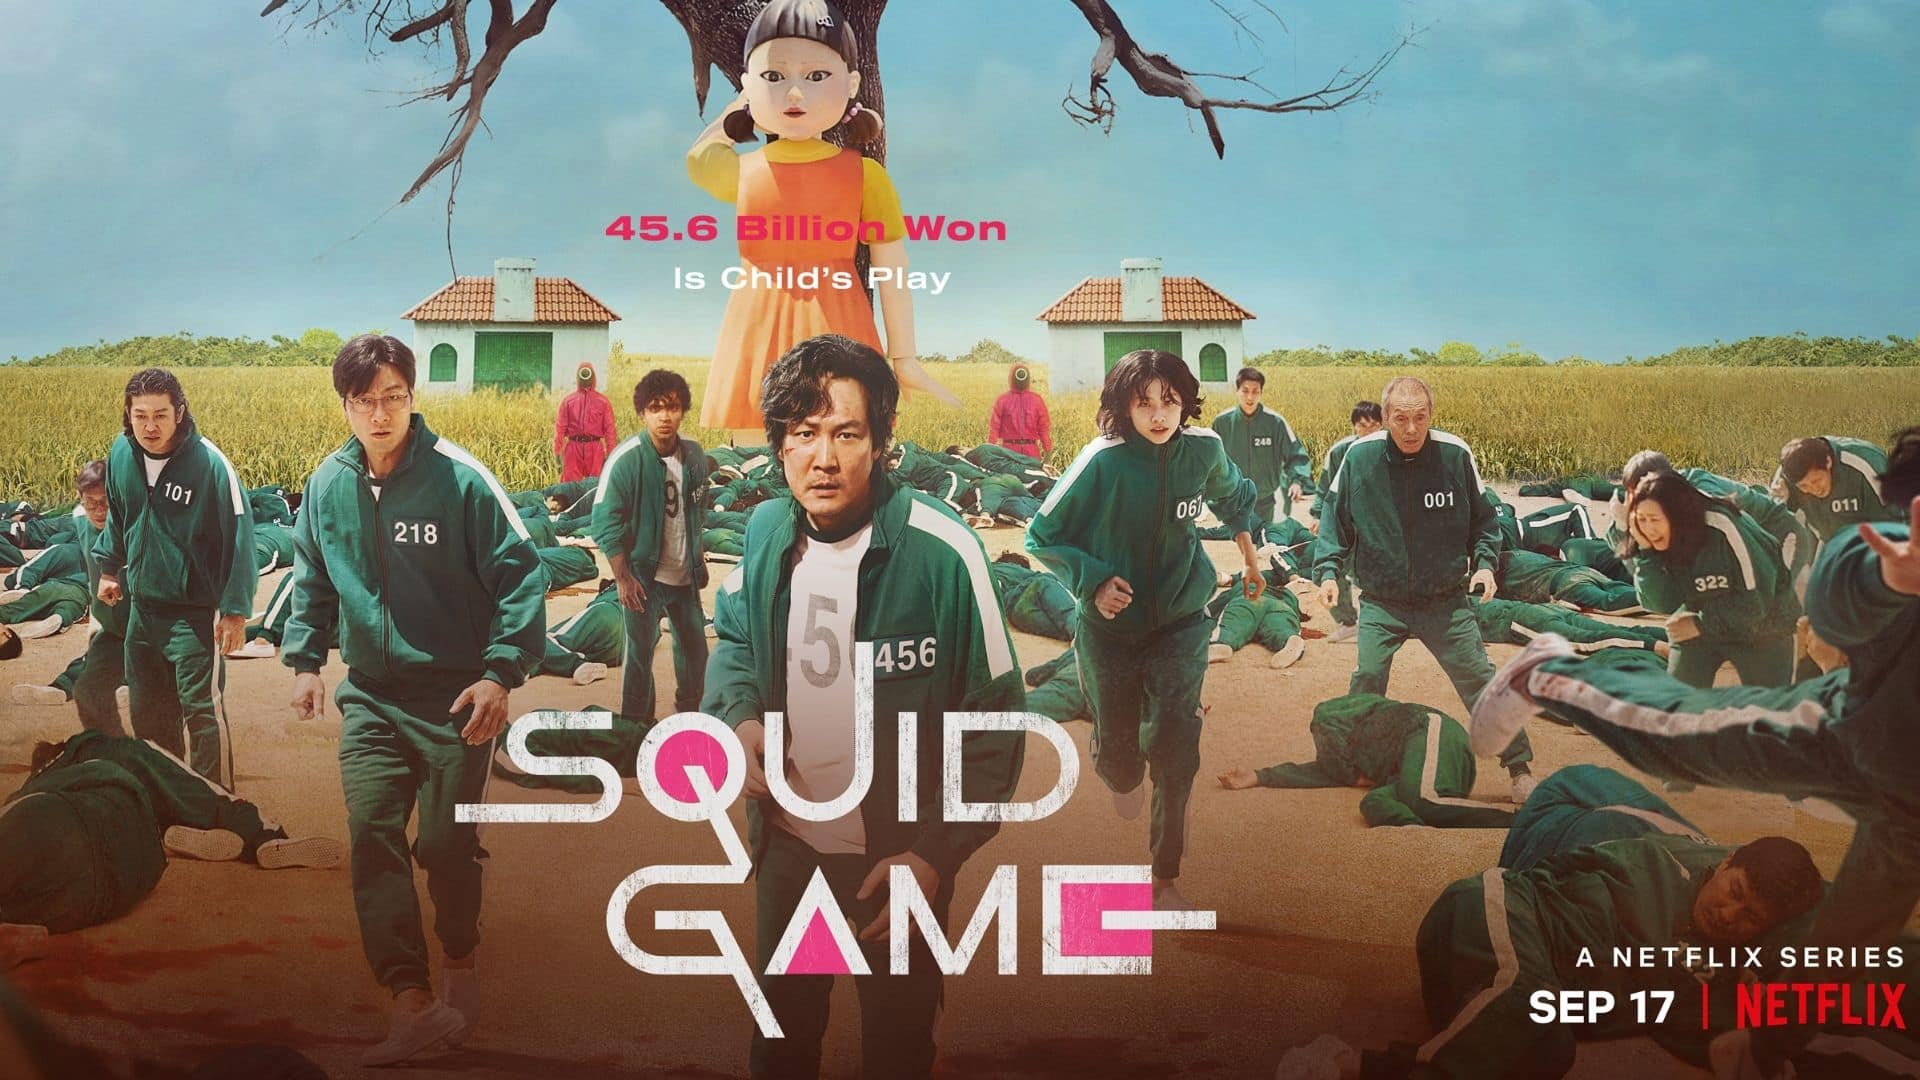 Squid Game netflix poster contestants run away from large doll in field